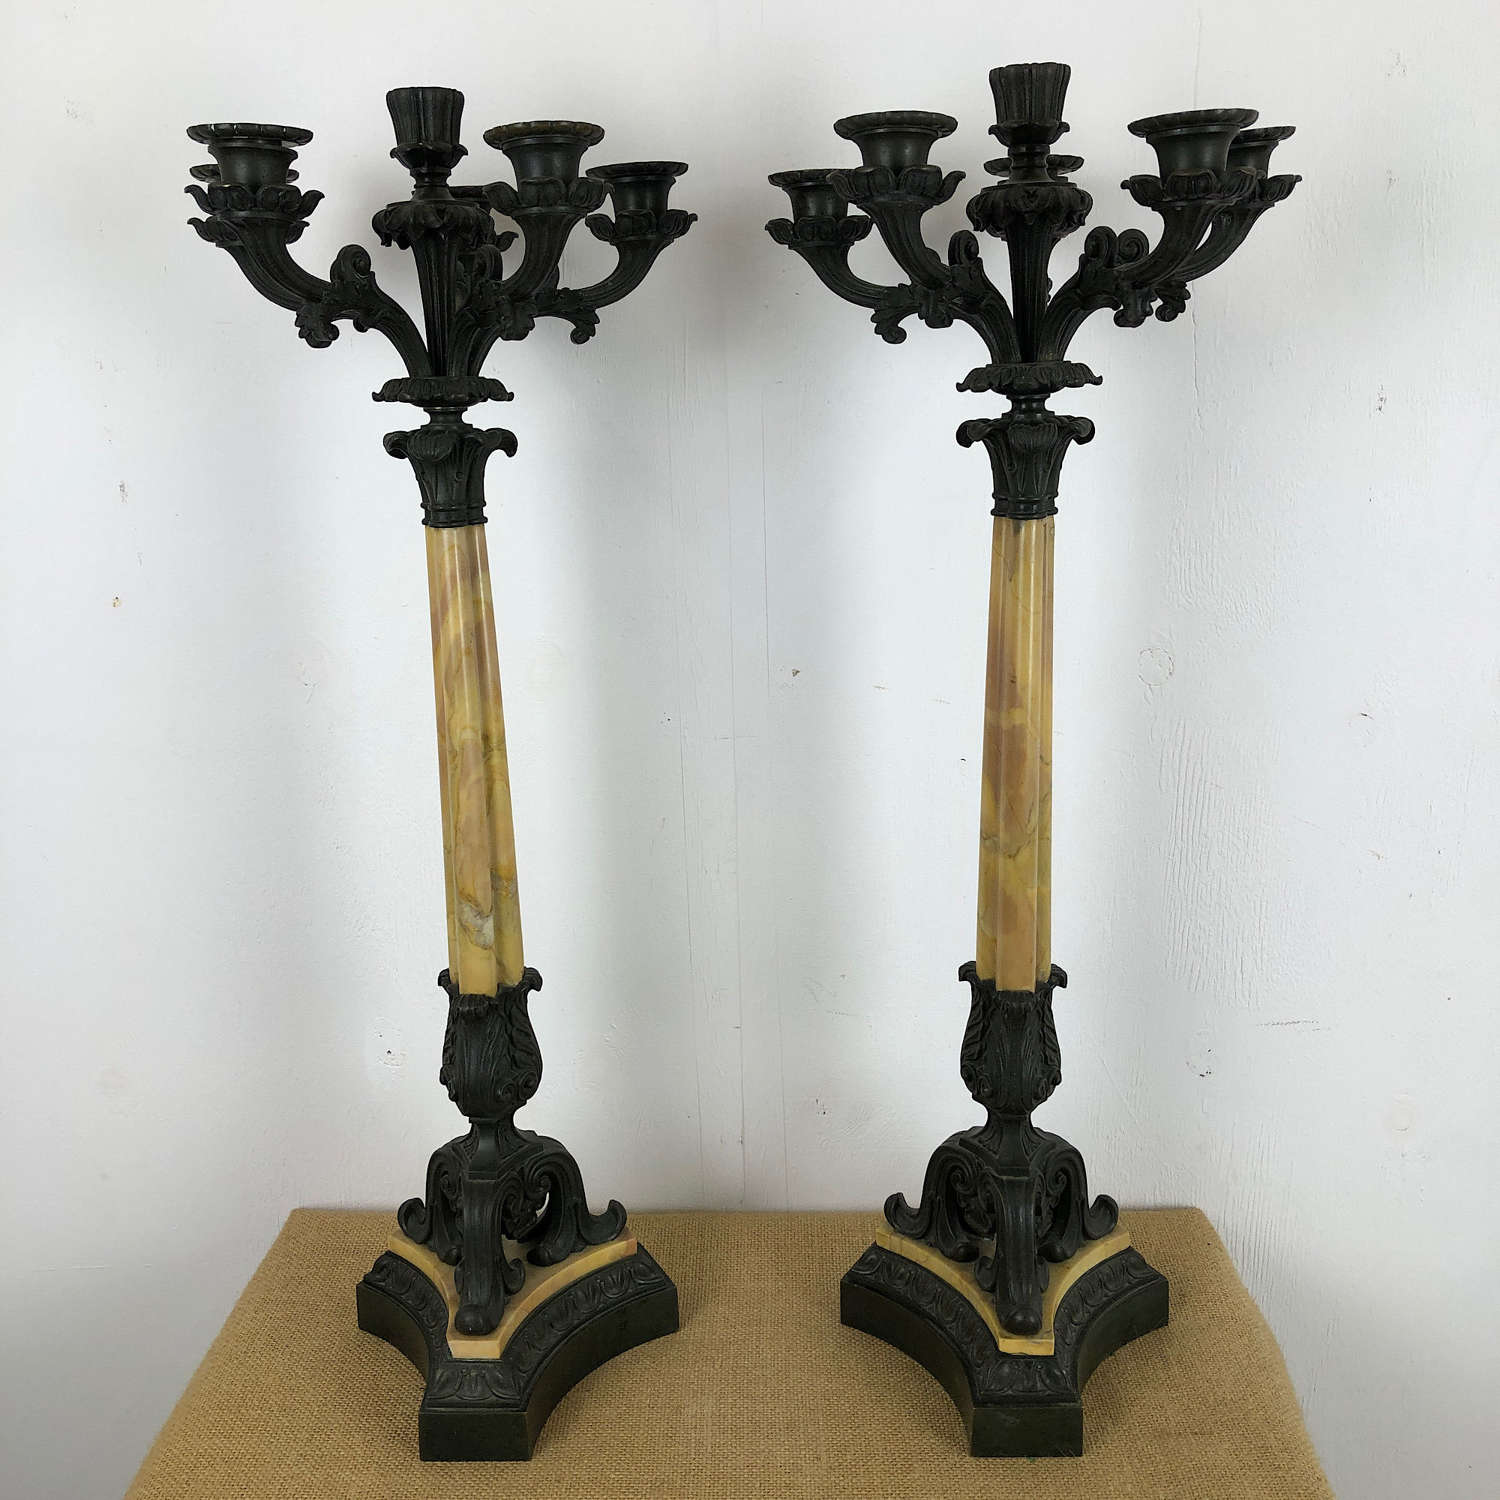 A Pair of early 19thC French Candelabra